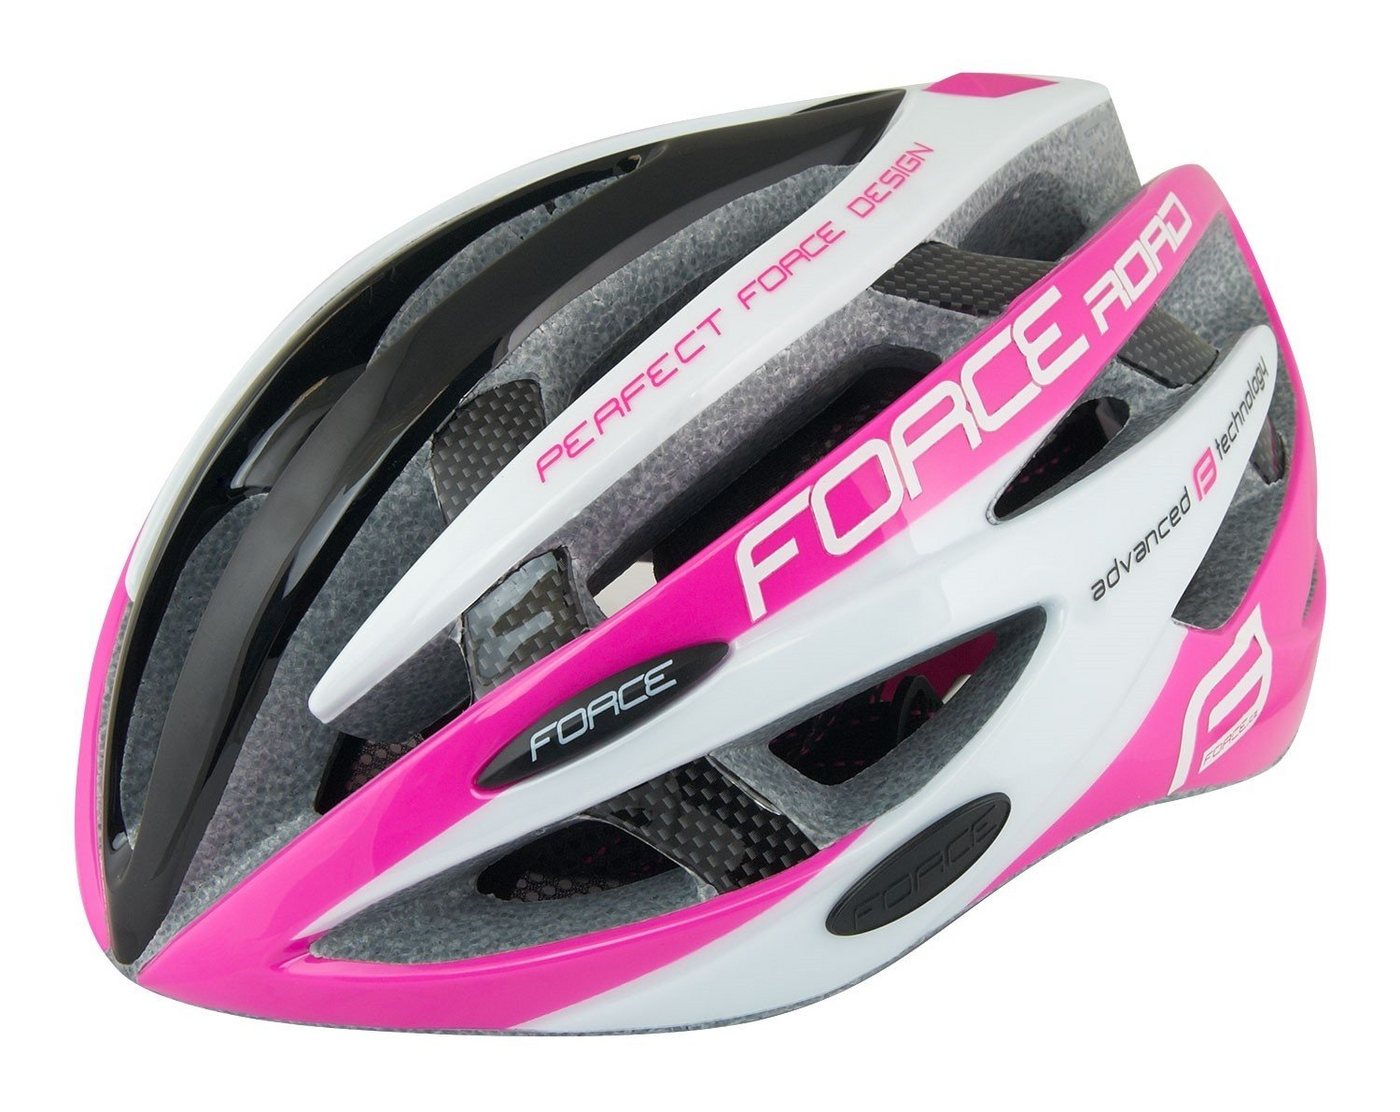 FORCE Fahrradhelm Helm FORCE ROADpink-white and a little black L - XL von FORCE